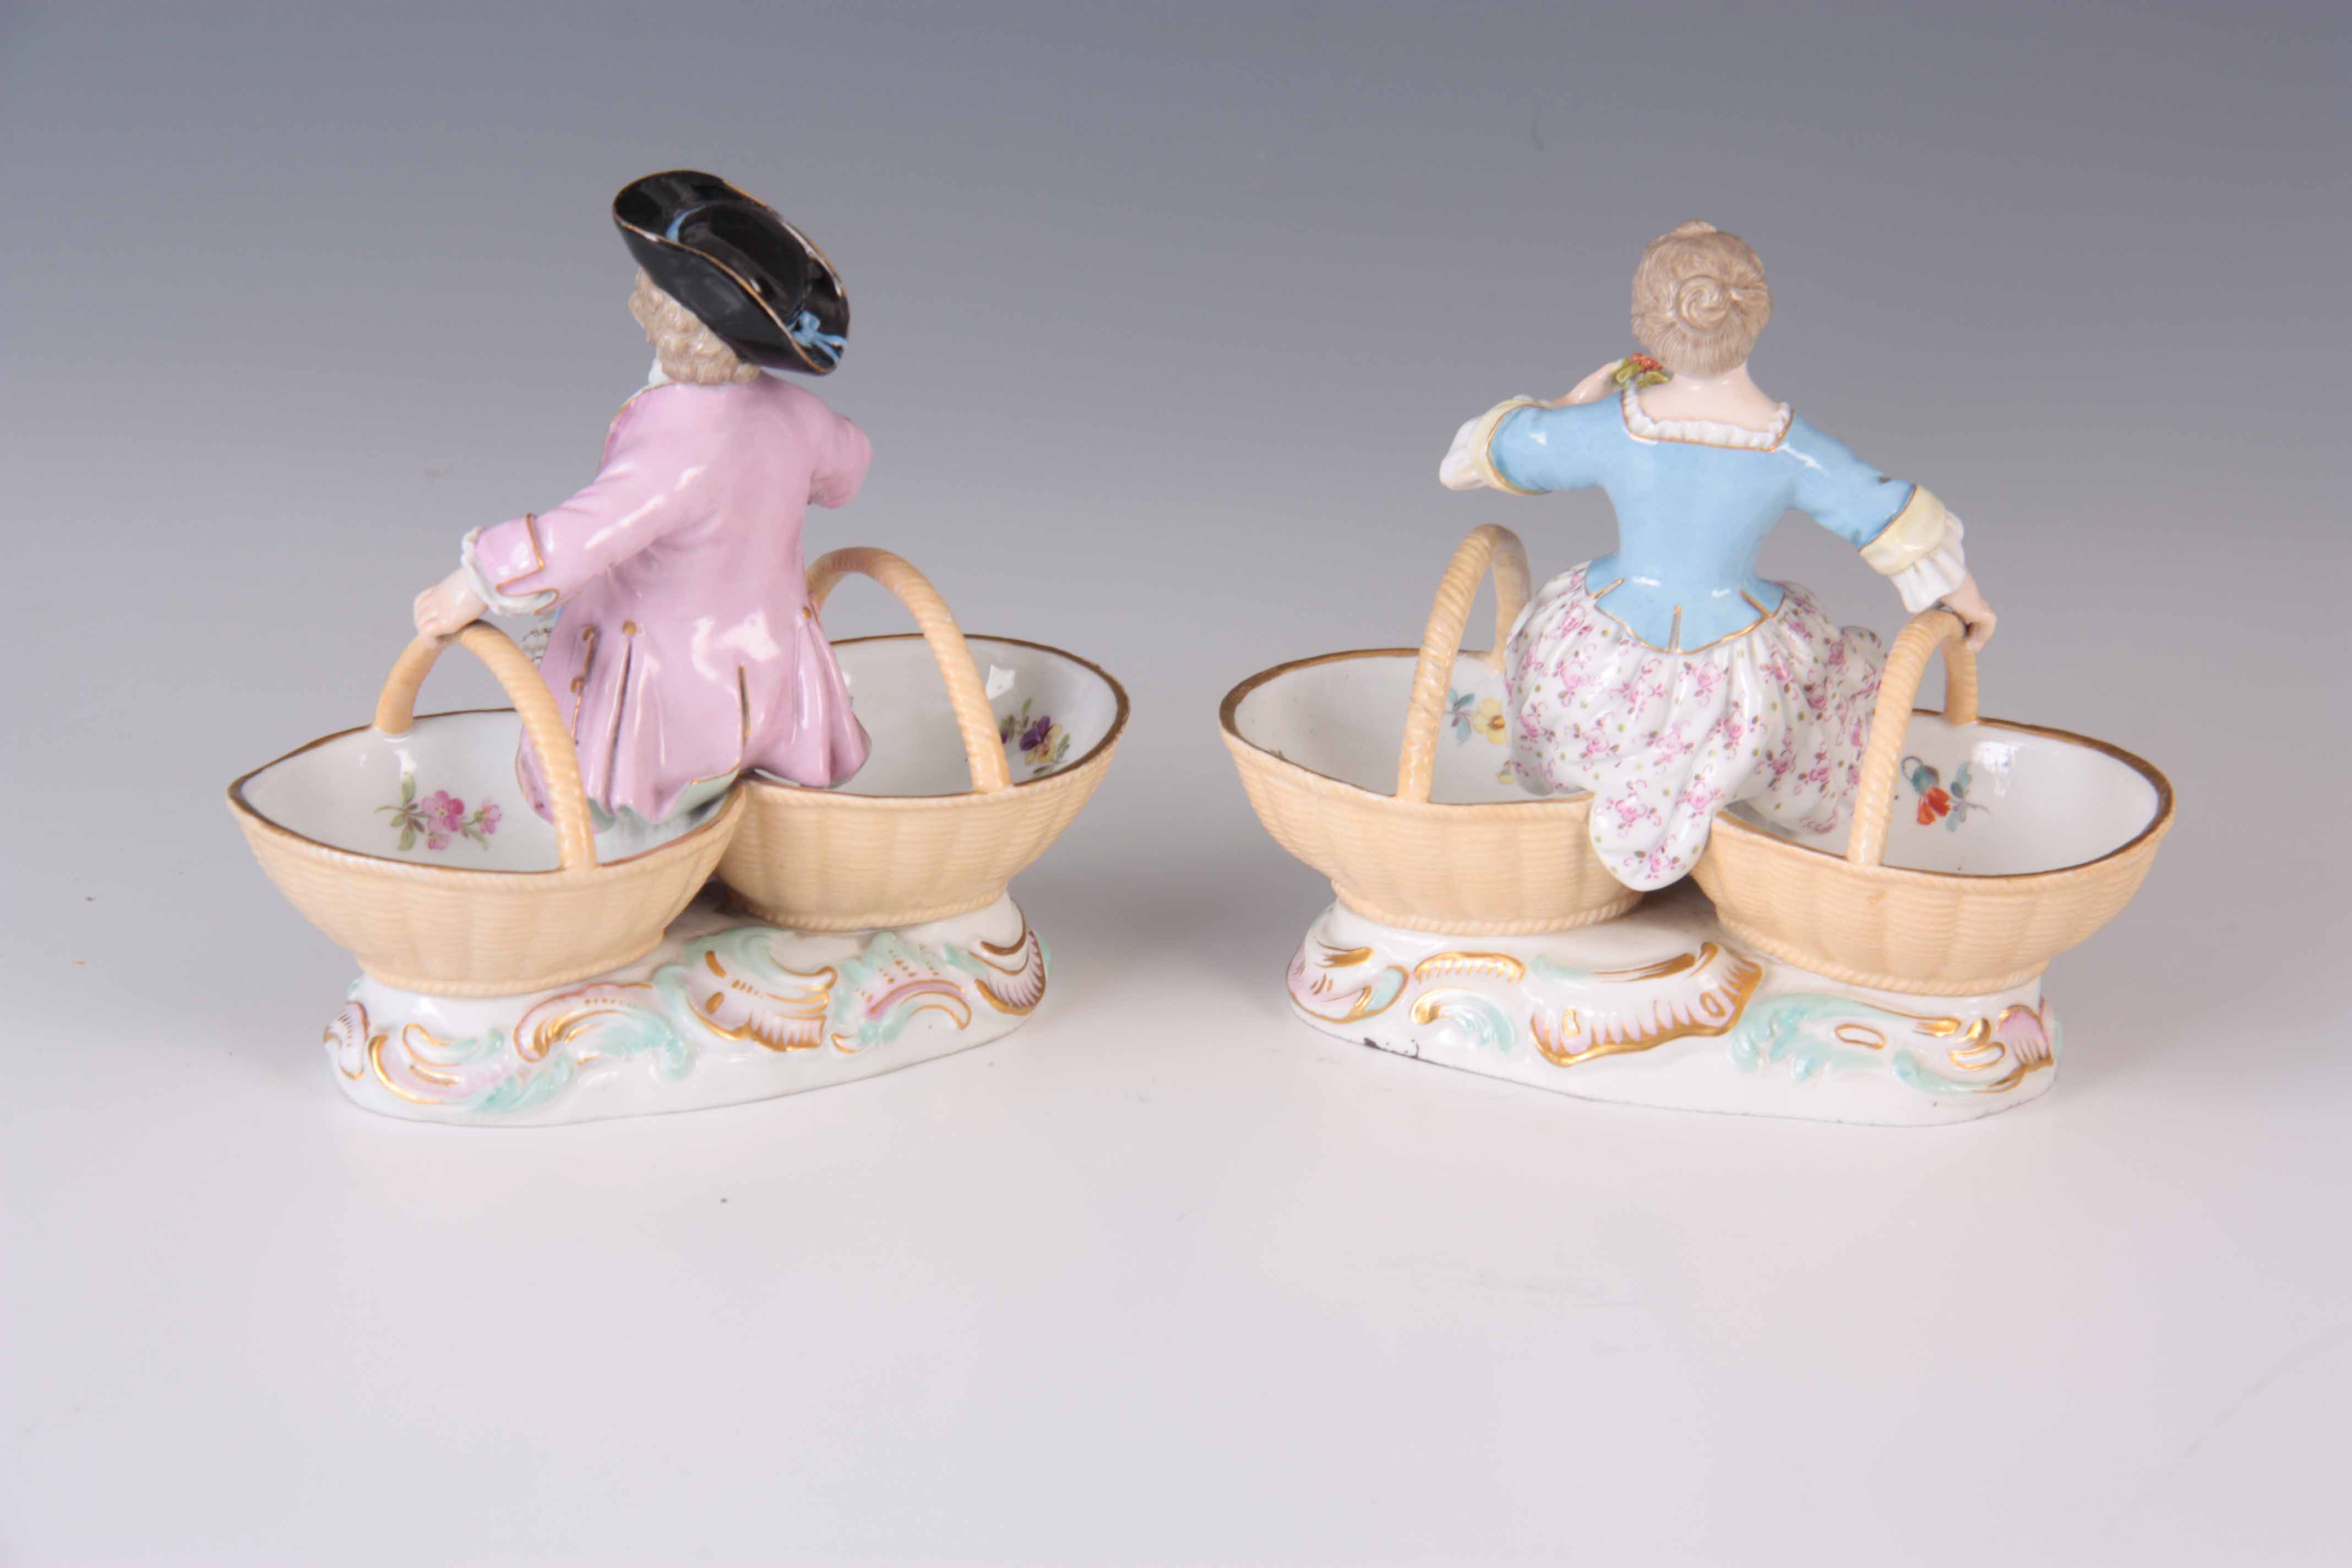 A PAIR OF 19TH CENTURY MEISSEN PORCELAIN TABLE SALTS depicting a young boy and girl sat between - Image 4 of 5